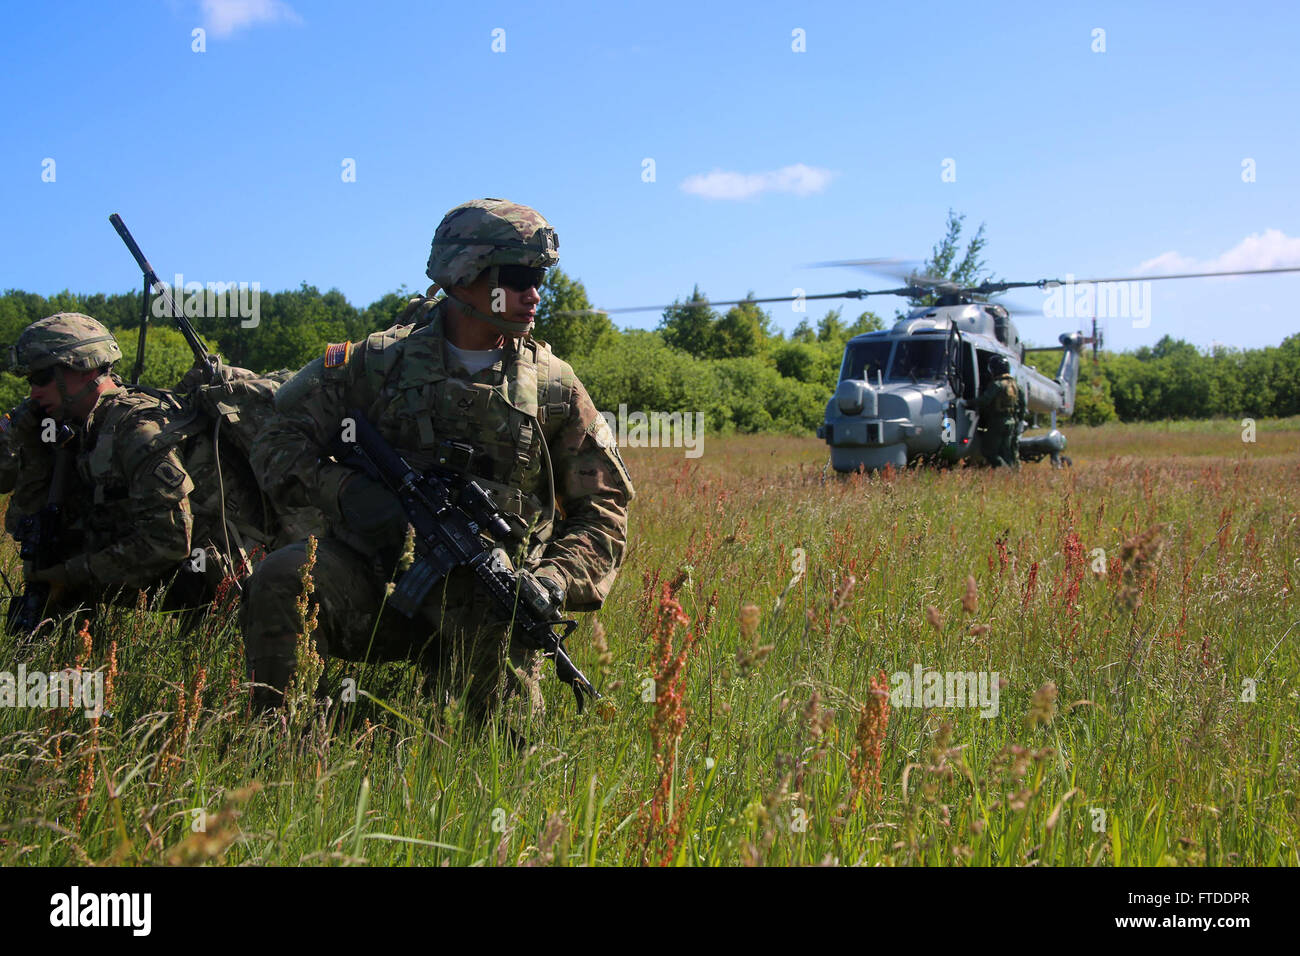 150615-M-OM669-006 POLAND (June 15, 2015) U.S. Army paratroopers from the 173d Airborne Brigade inserted into Poland via a British Royal Navy Lynx Mk-8 and conducted a personnel extraction, June 15. The mission is one of the exercise scenarios for BALTOPS 2015, an annually reoccurring multinational exercise designed to enhance flexibility and interoperability, as well as demonstrate resolve of allied and partner forces to defend the Baltic region. (Official U.S. Marine Corps photo by 1st Lt. Sarah E. Burns/Released) Stock Photo